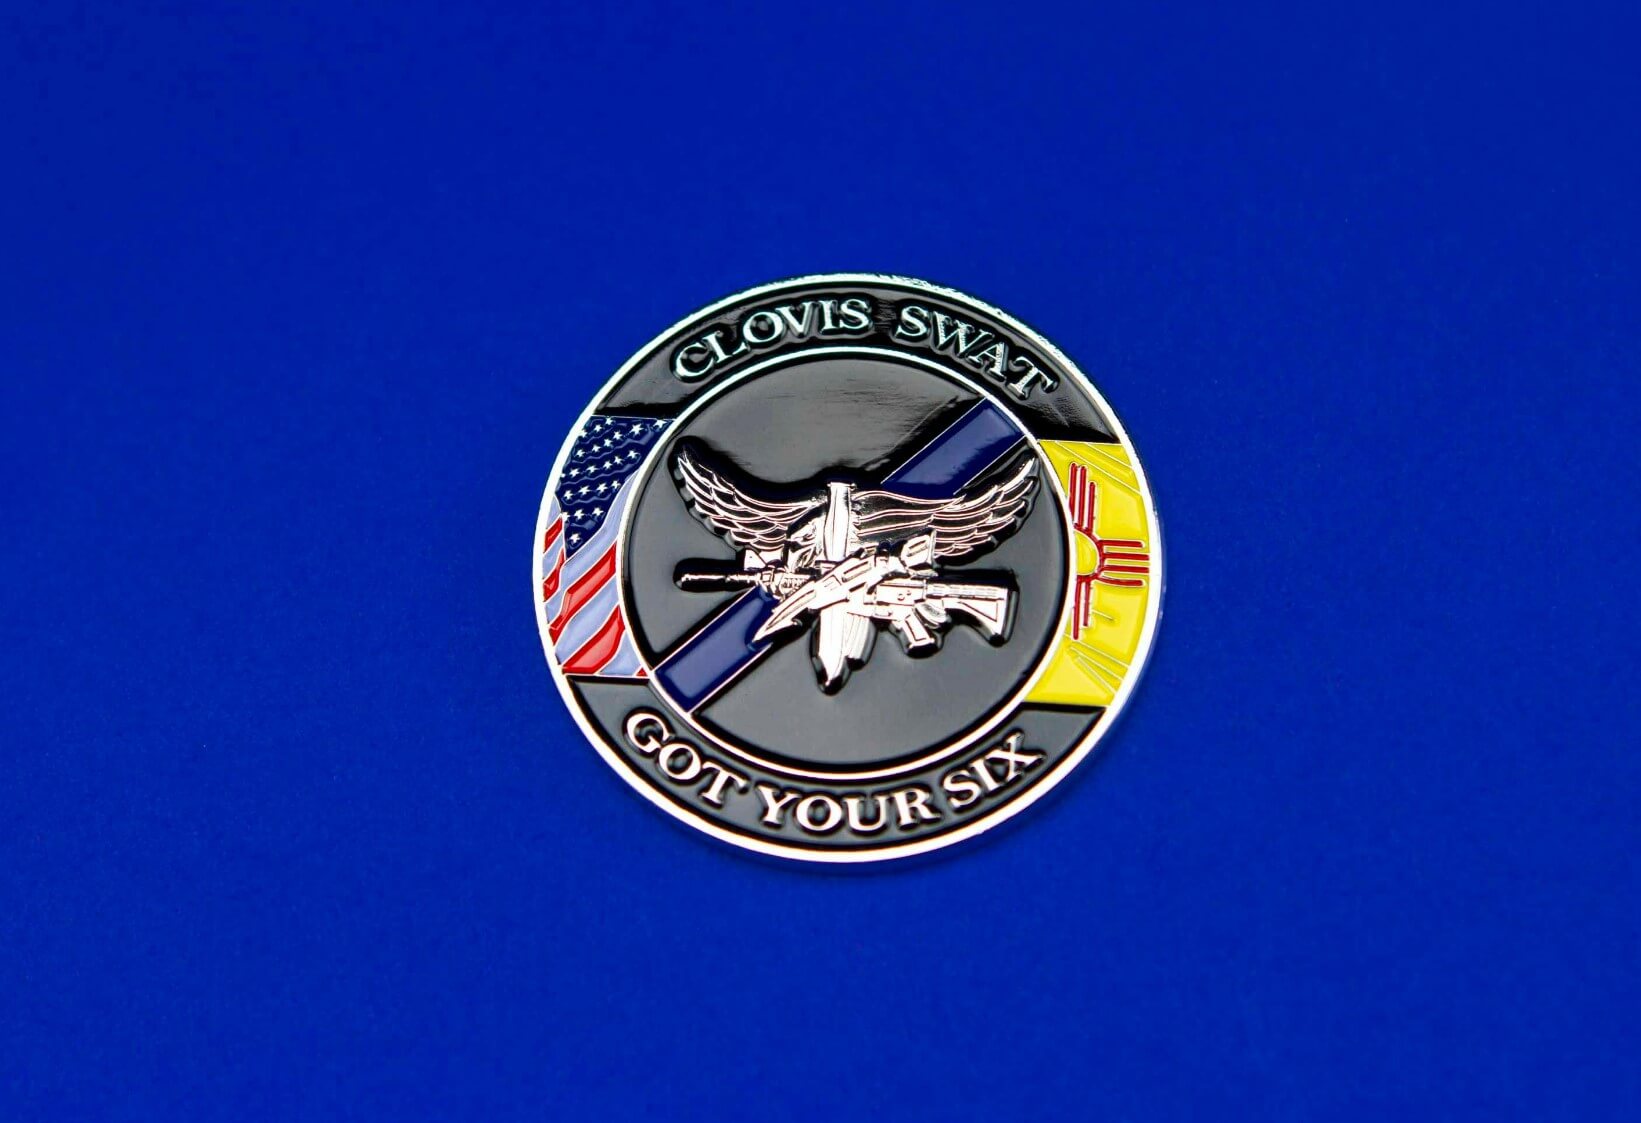 POLISHED SILVER COIN EXAMPLE - CMI 1